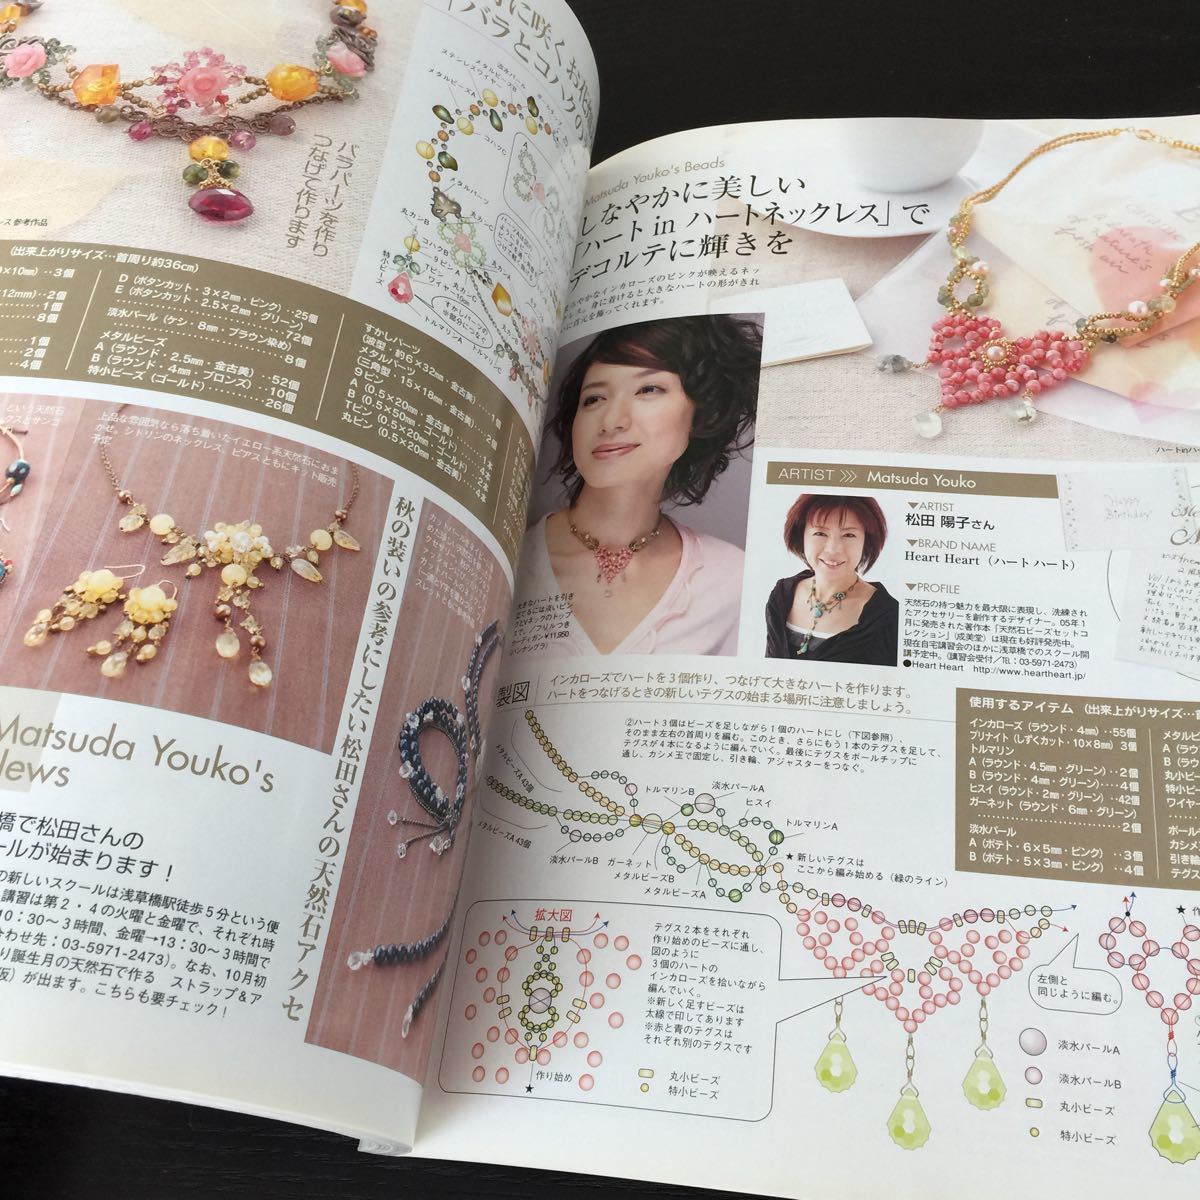 a6 beads friend 2005 year 10 month 1 day issue hand made handmade accessory necklace bracele back natural stone beads motif magazine 